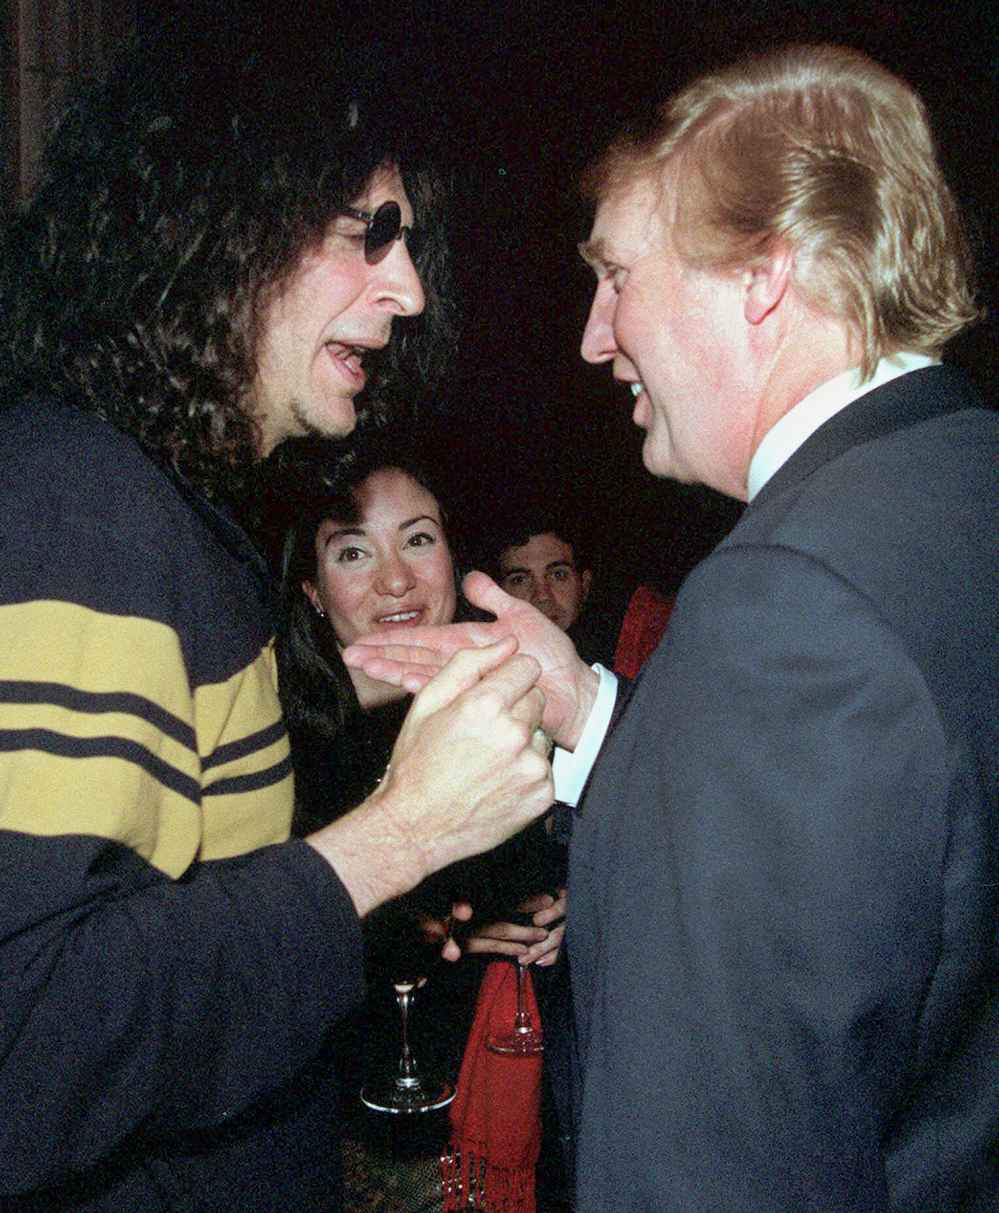 Howard Stern, left, speaks with Donald Trump at a party given by the New York Post, Wednesday, Feb. 9, 2000, in New York.